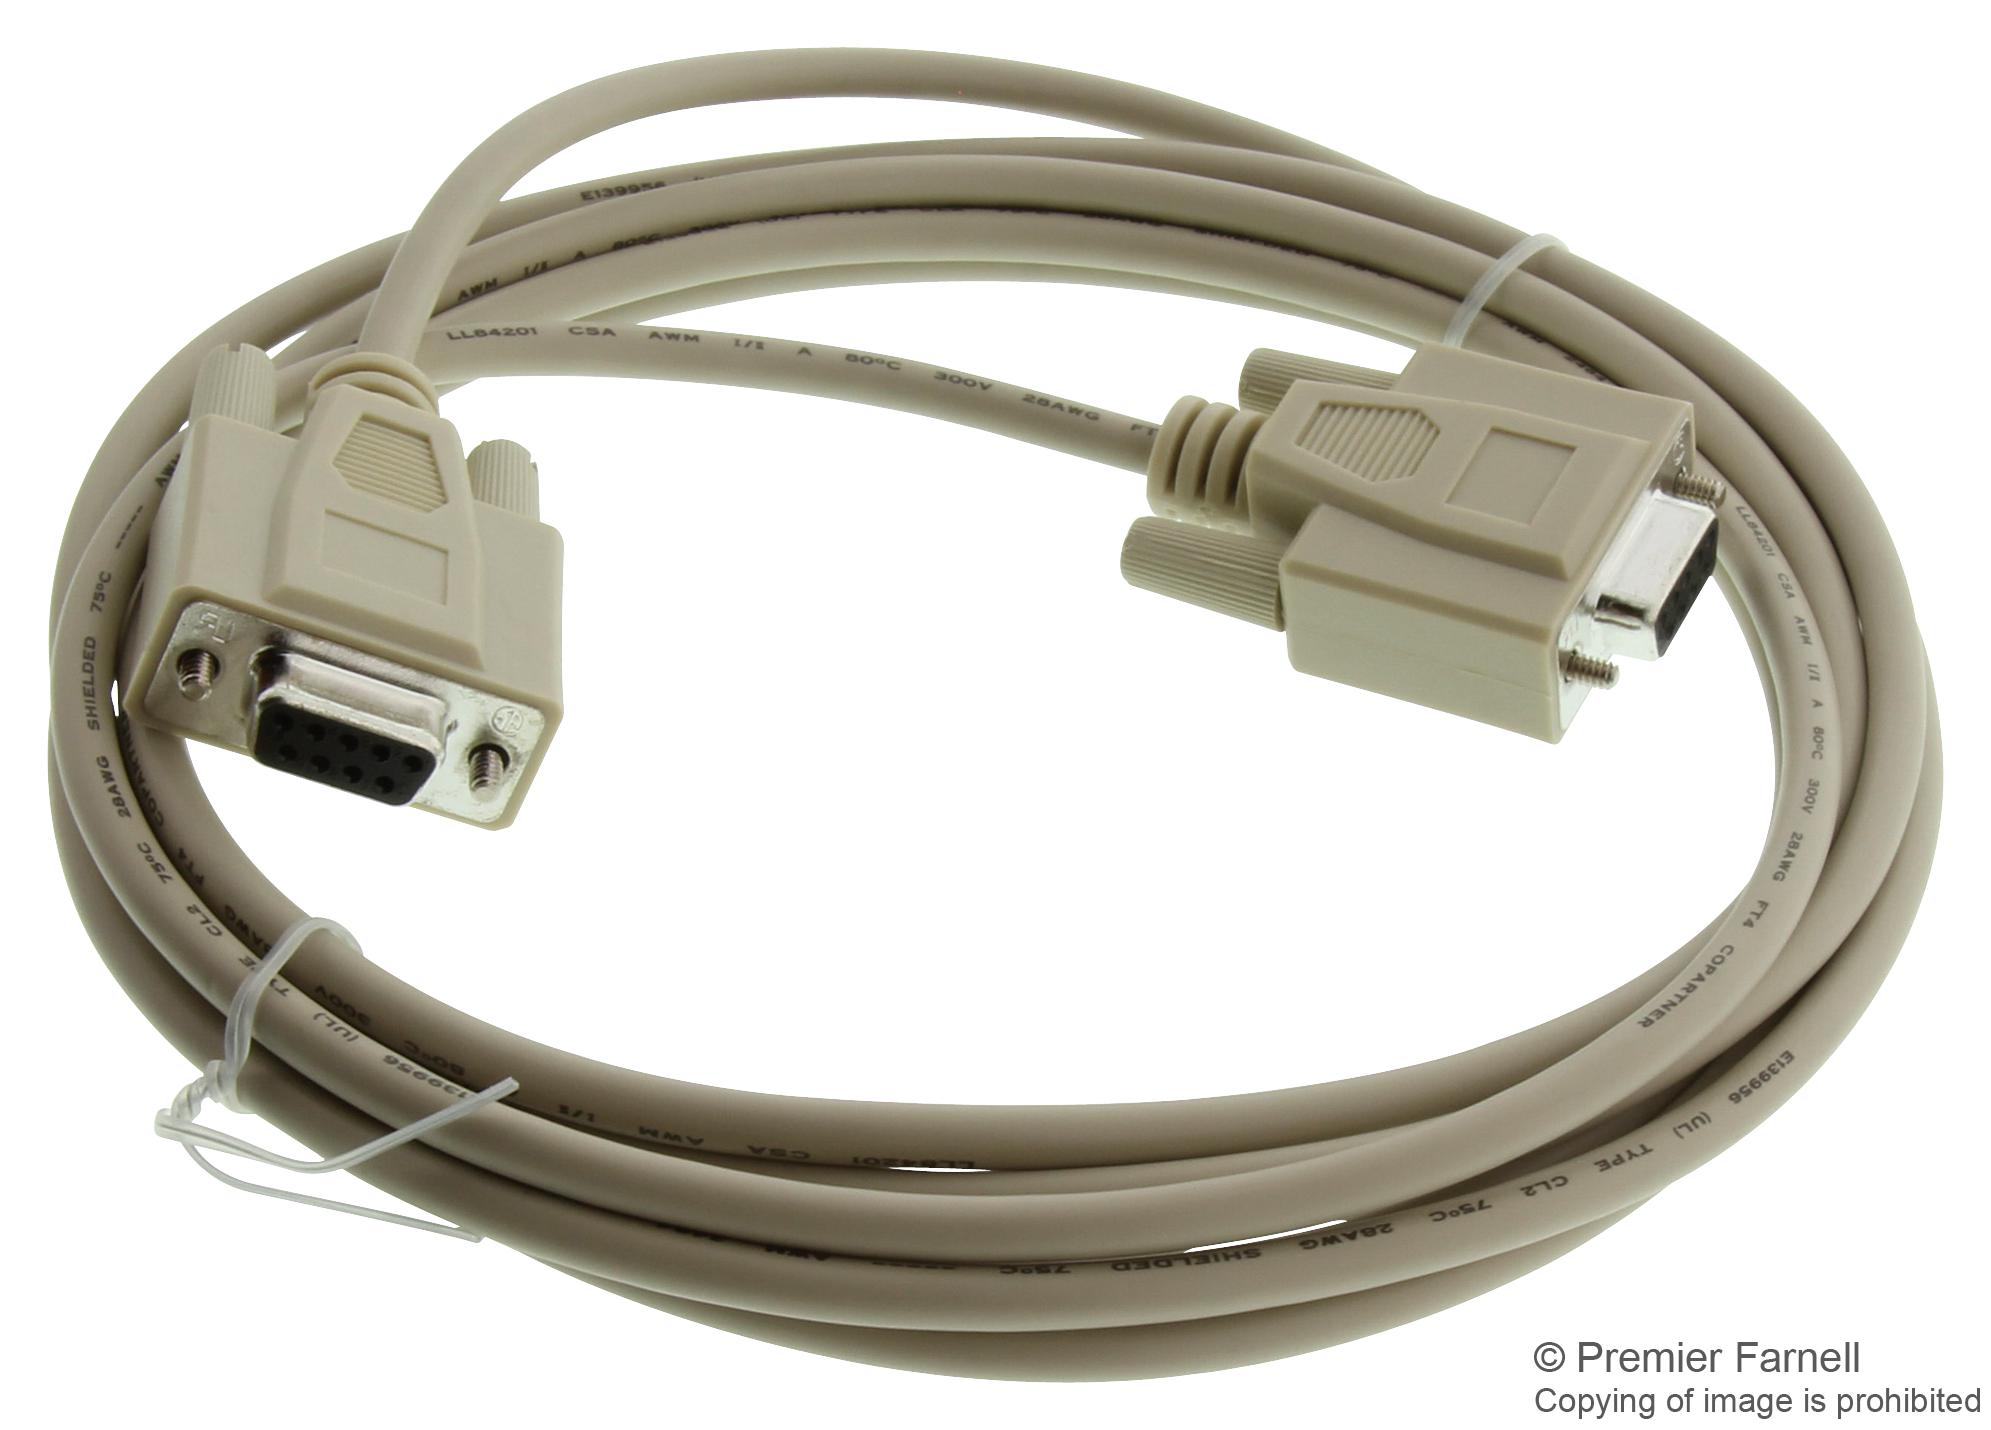 621850-2 NULL MODEM CABLE ASSEMBLY AMP - TE CONNECTIVITY